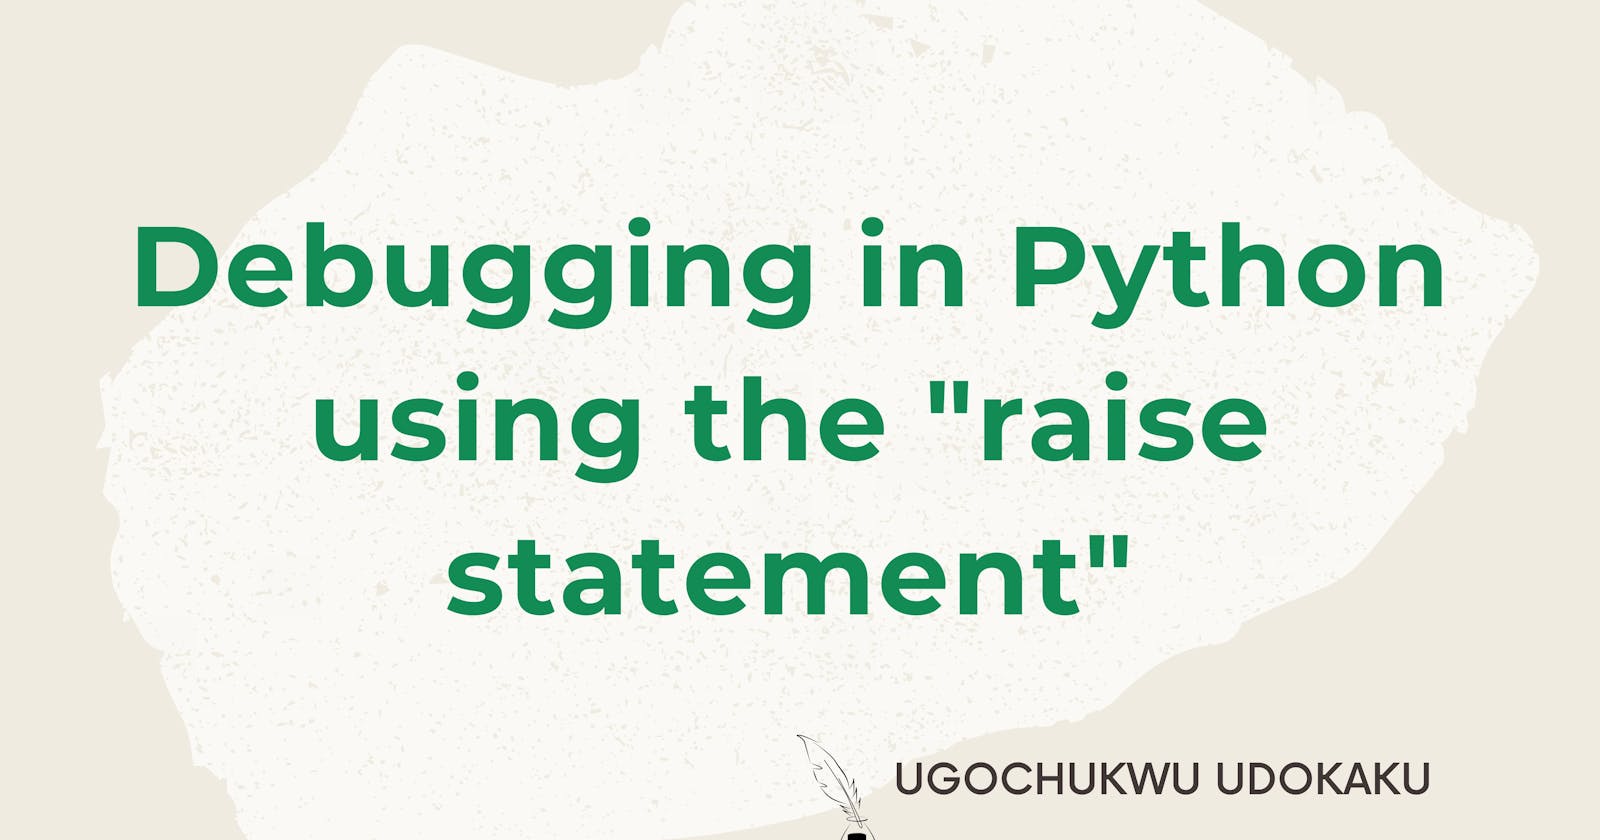 Debugging in python using the "raise statement"